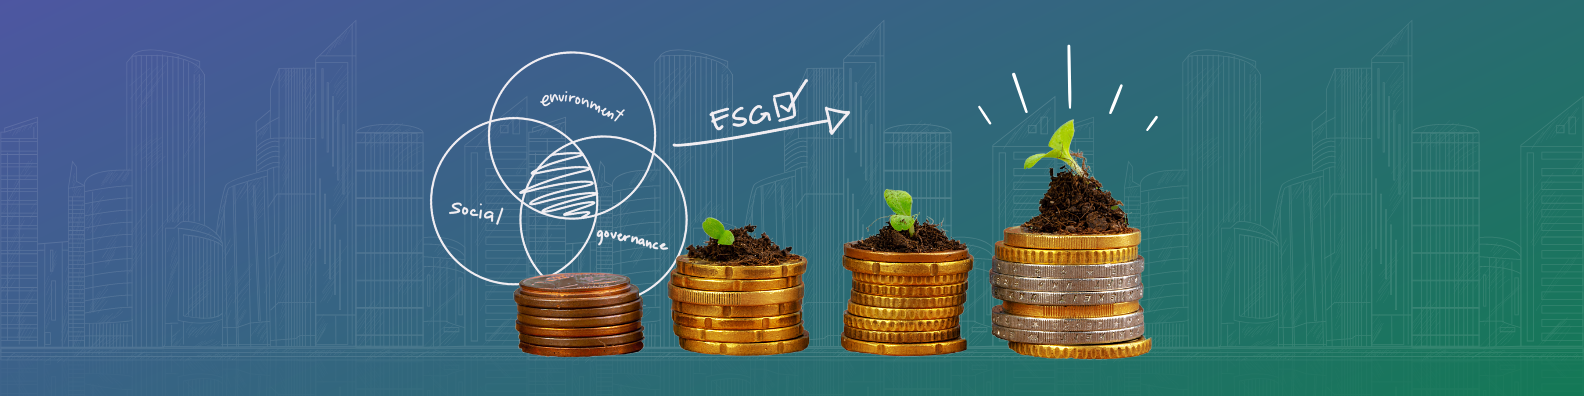 Sustainable Financing image with stacked coins and plant. Chart of ESG is also shown in the background.